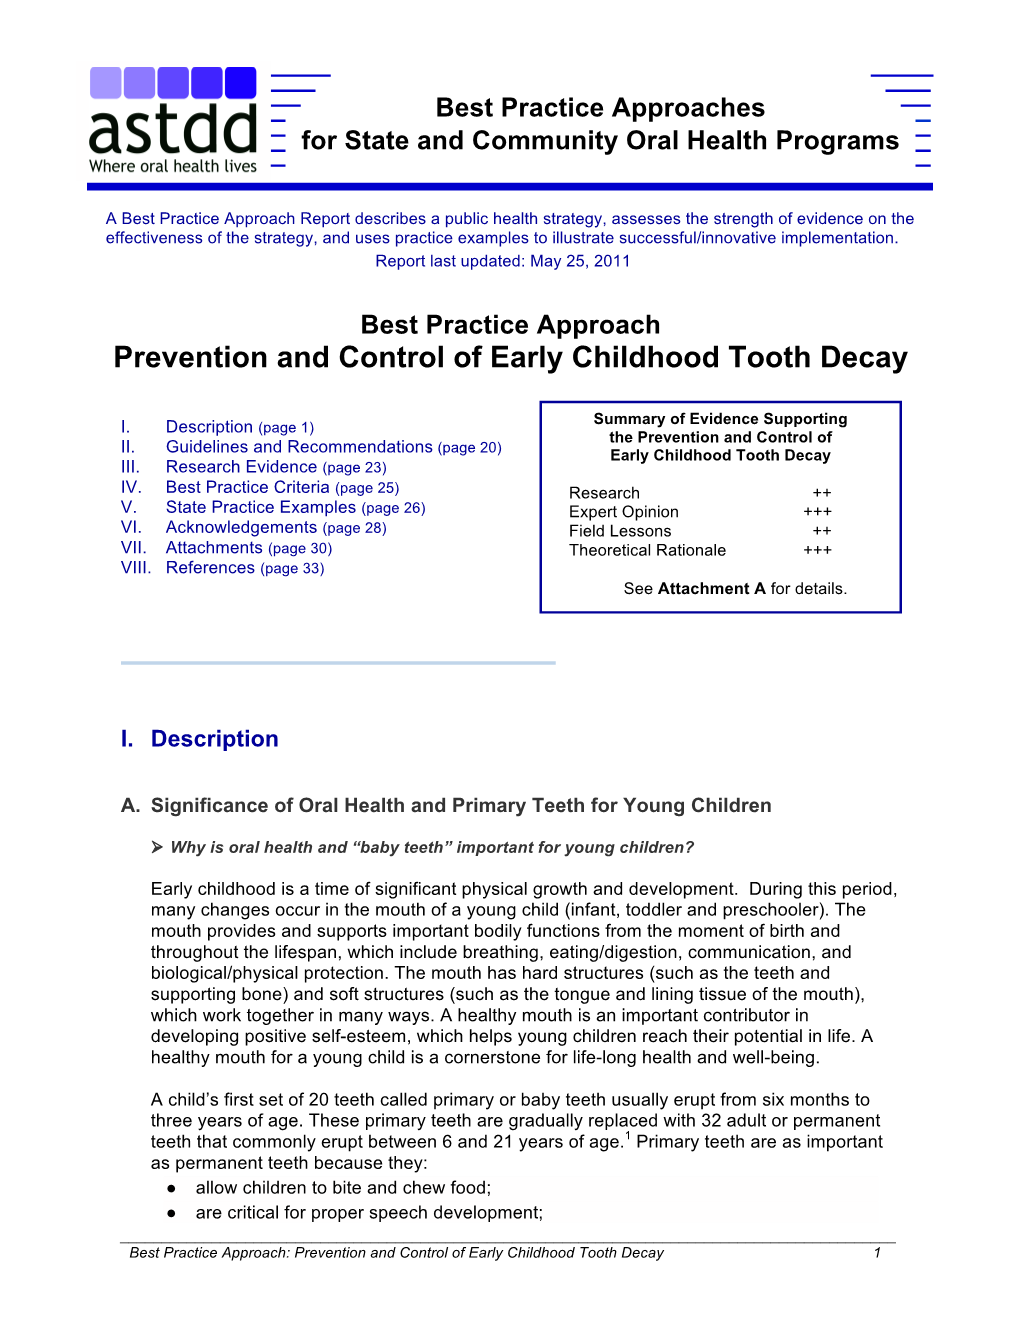 Prevention and Control of Early Childhood Tooth Decay